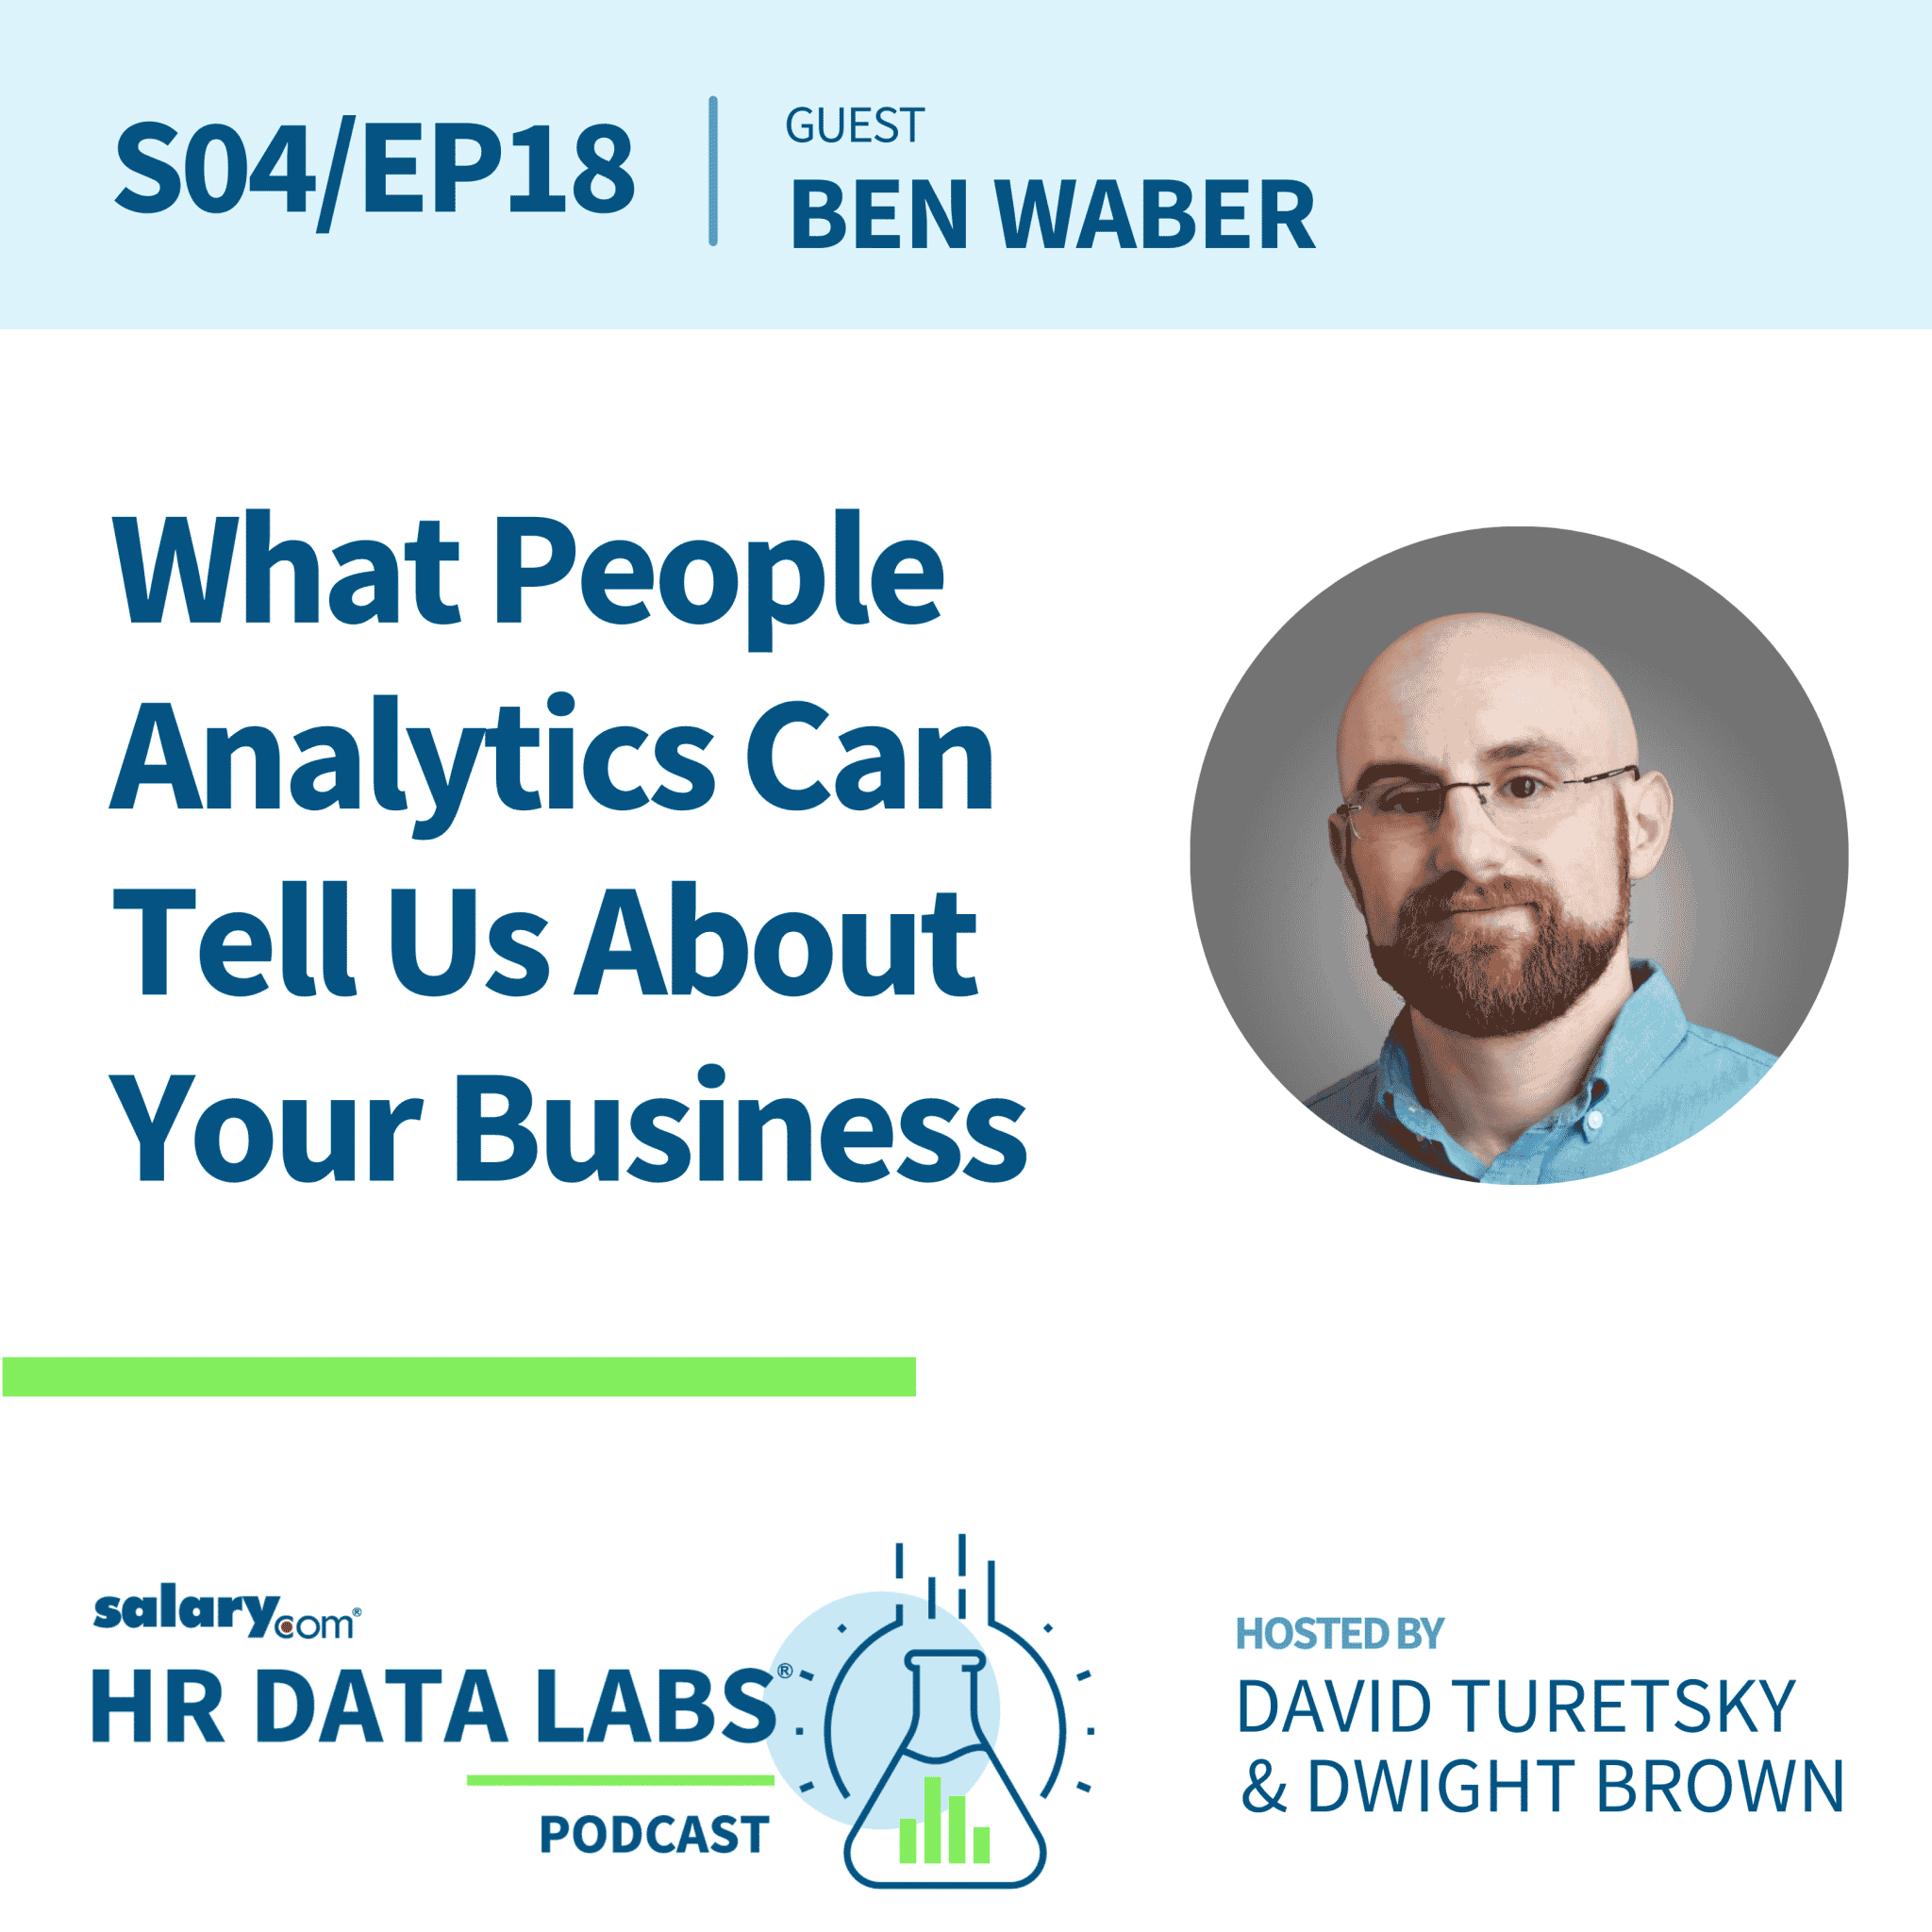 Ben Waber – What People Analytics Can Tell Us About Your Business